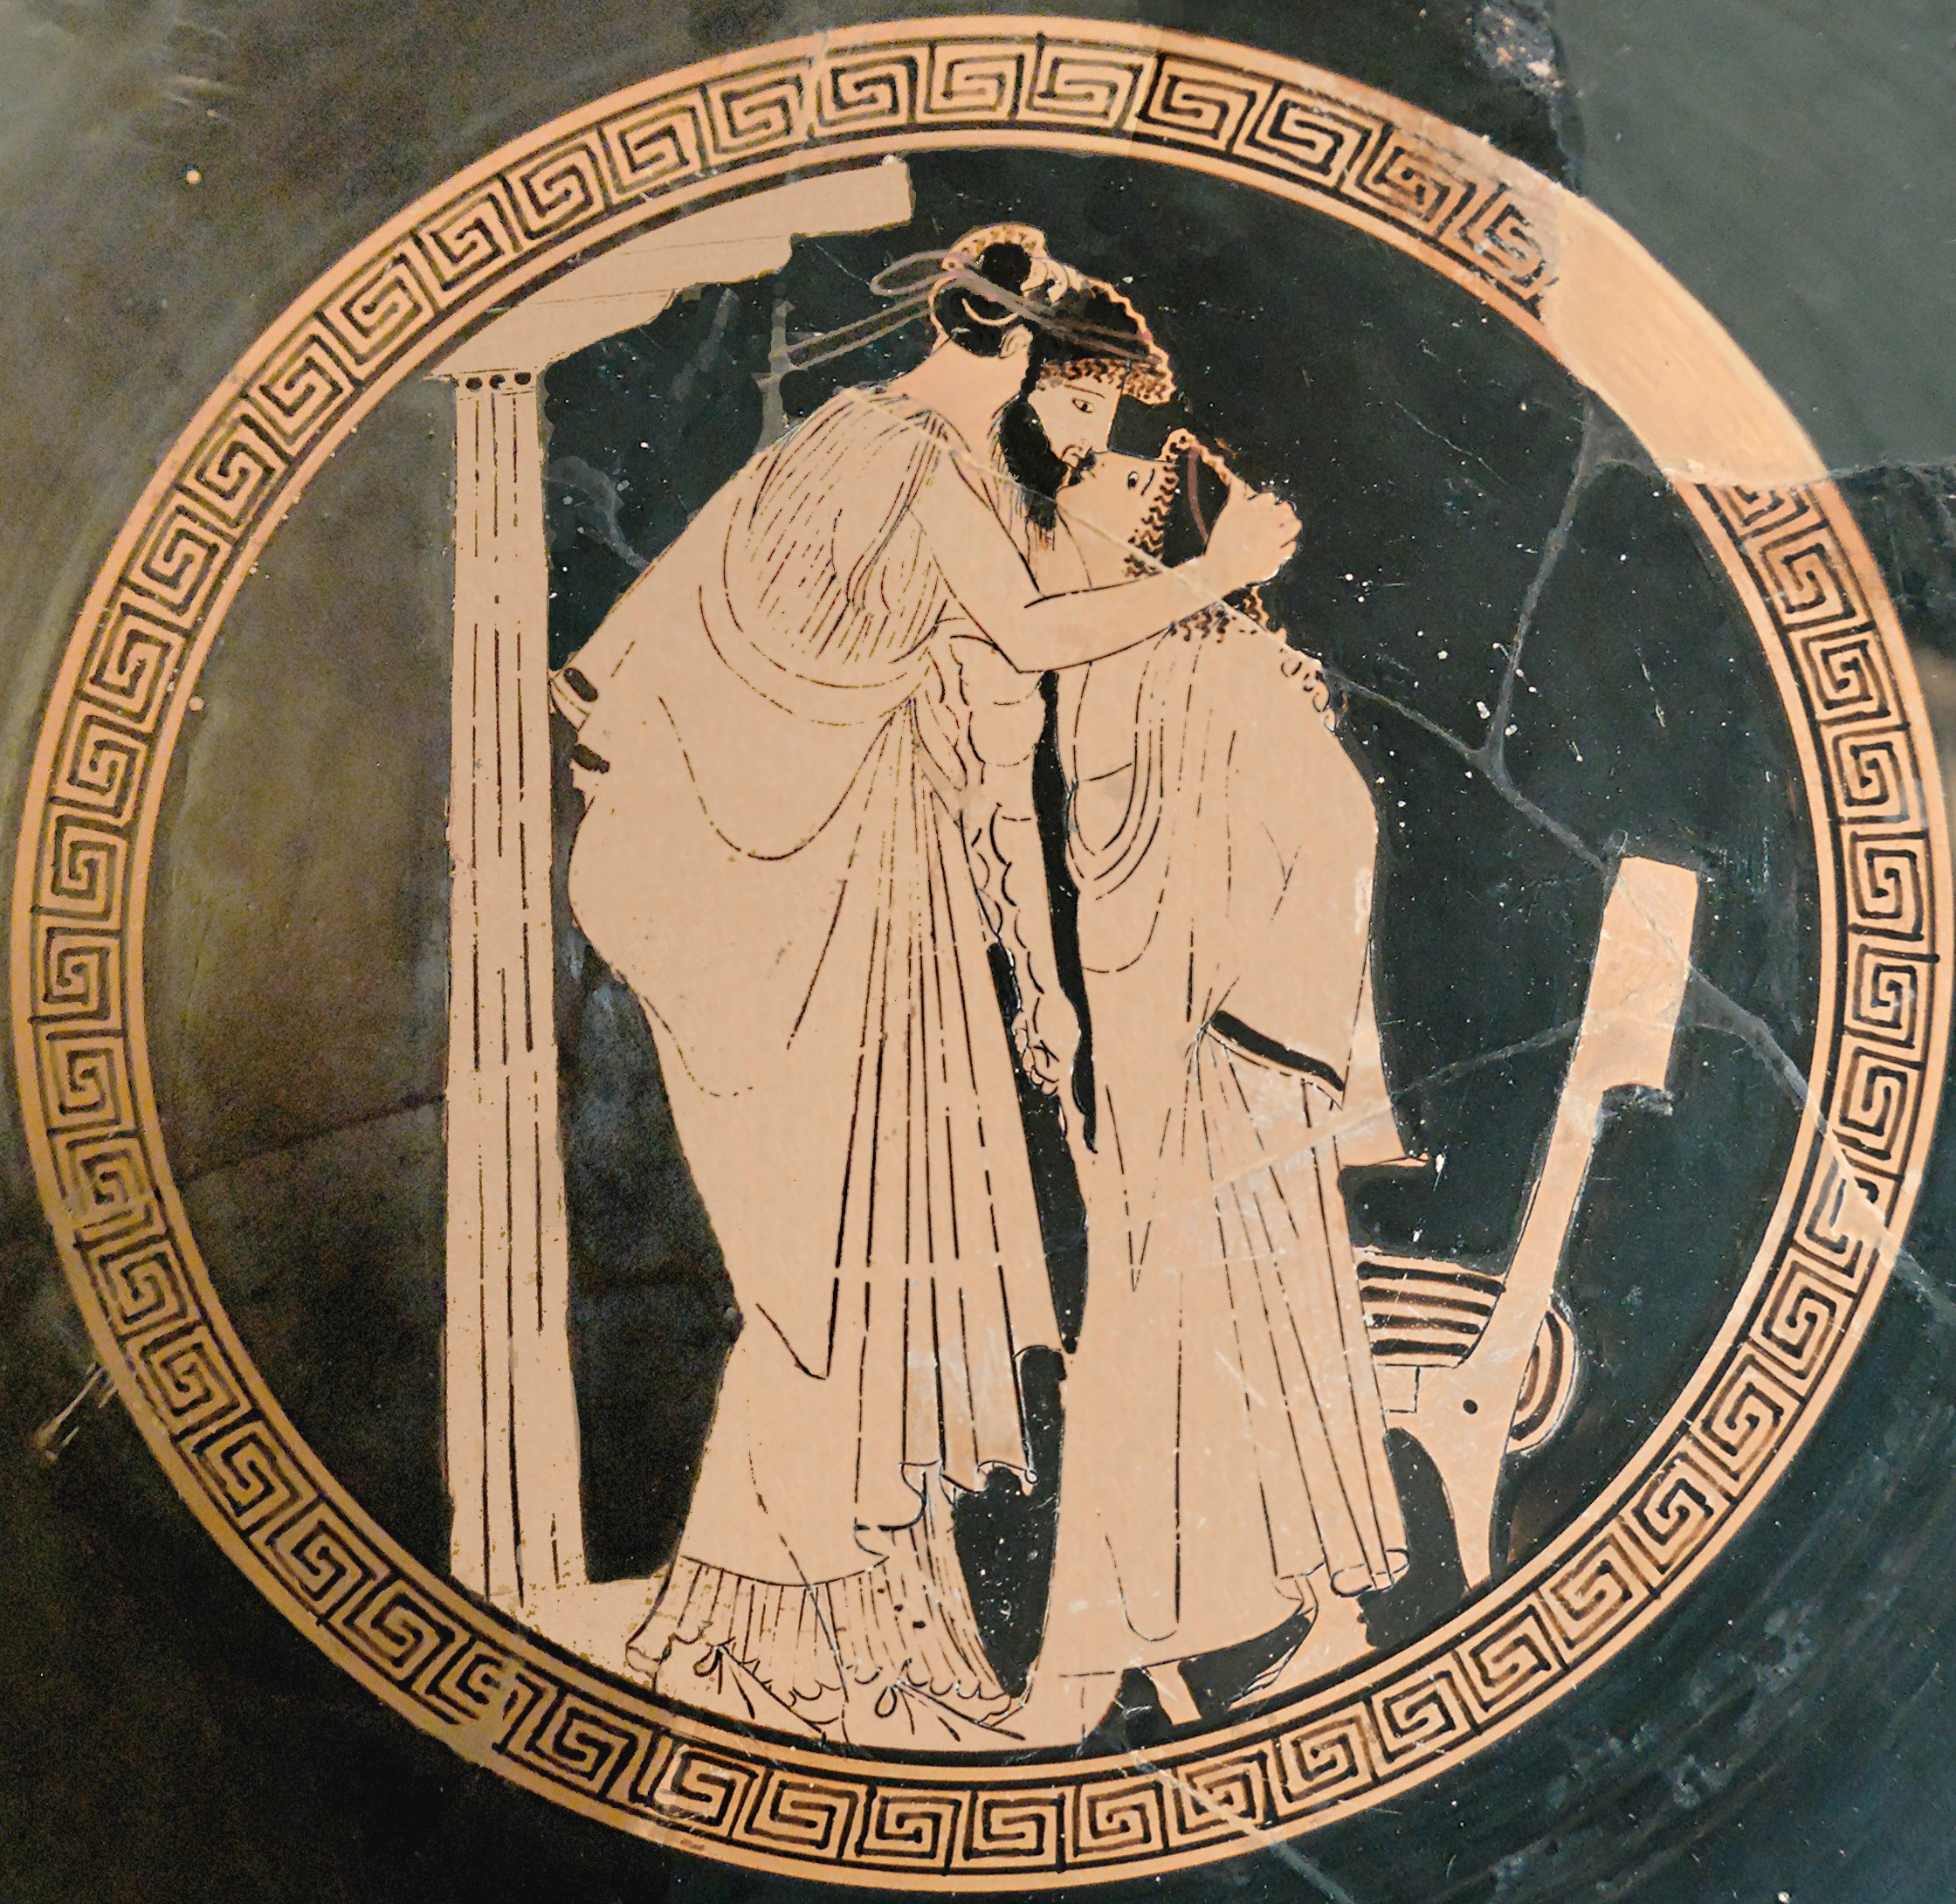 ancient greek vases of pederasty in ancient greece wikipedia with regard to social aspectsedit